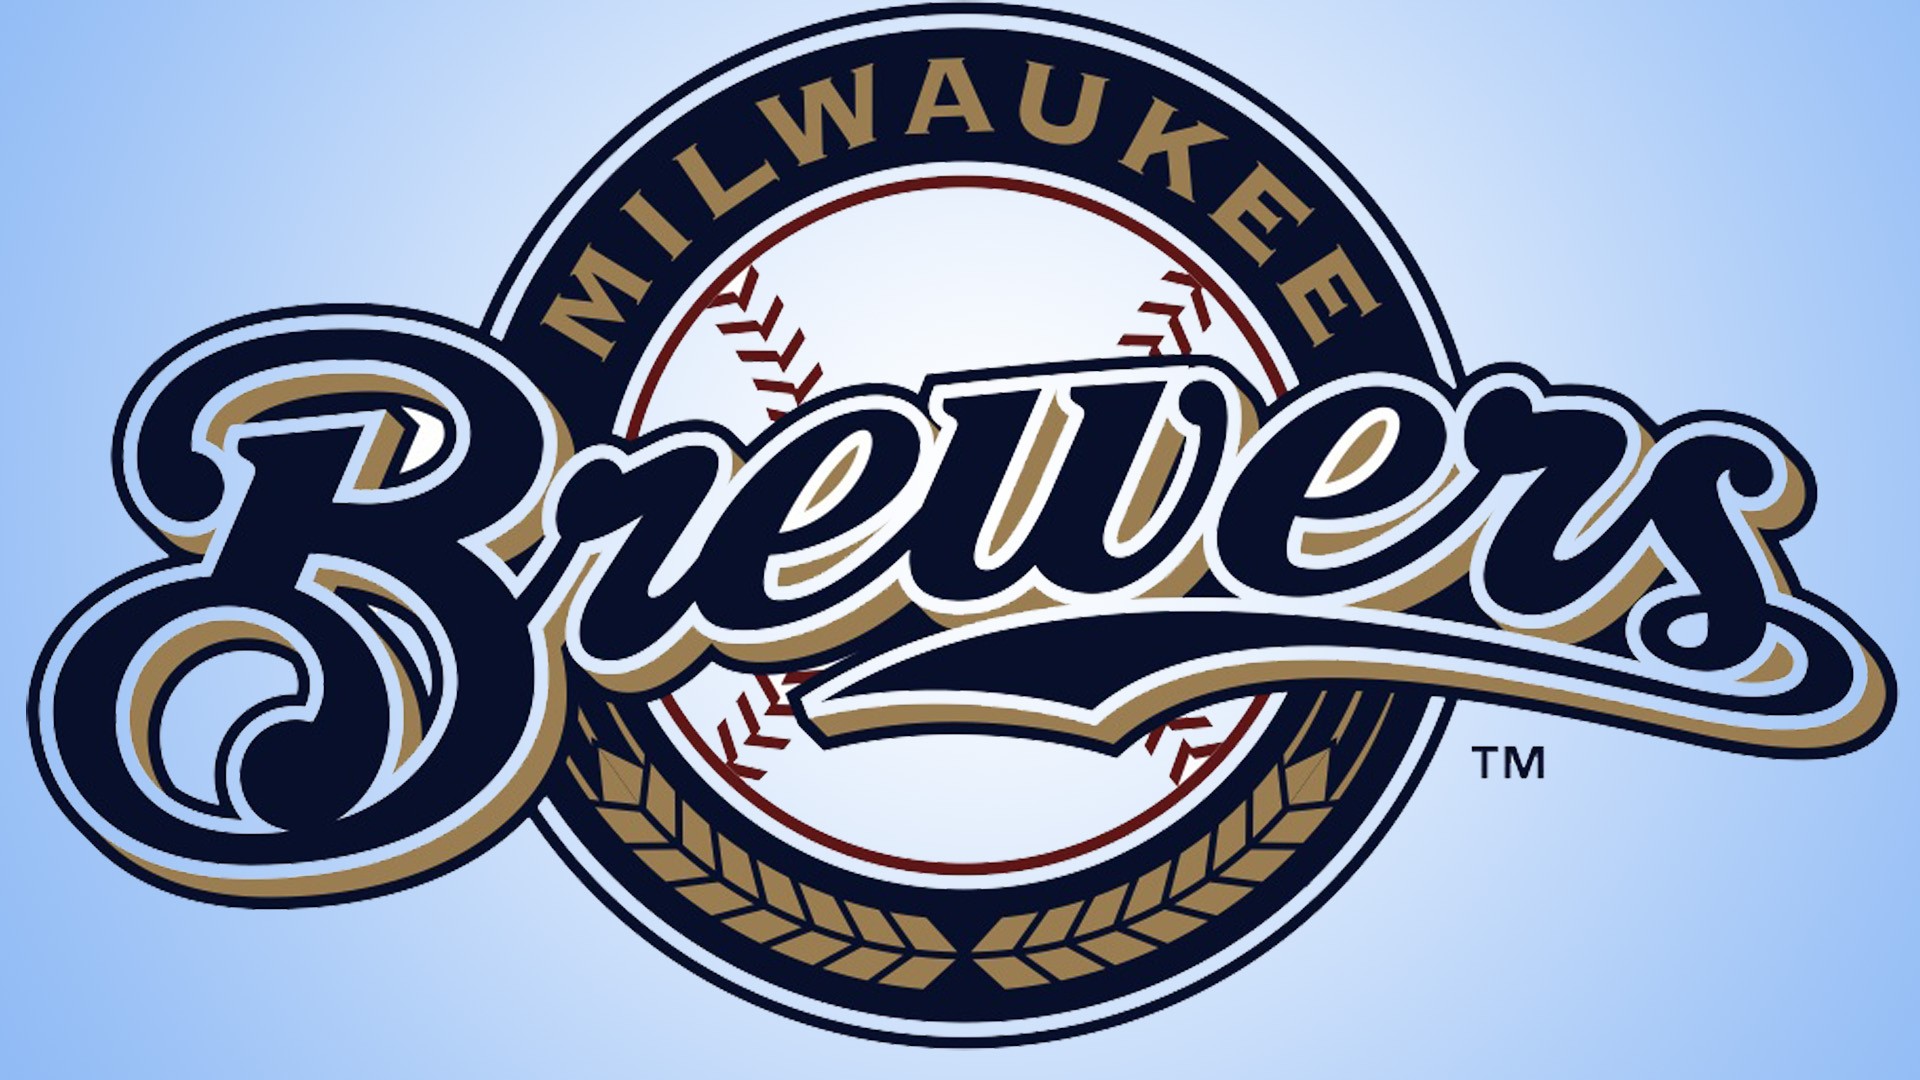 Wallpaper Desktop Milwaukee Brewers MLB HD With high-resolution 1920X1080 pixel. You can use this wallpaper for Mac Desktop Wallpaper, Laptop Screensavers, Android Wallpapers, Tablet or iPhone Home Screen and another mobile phone device